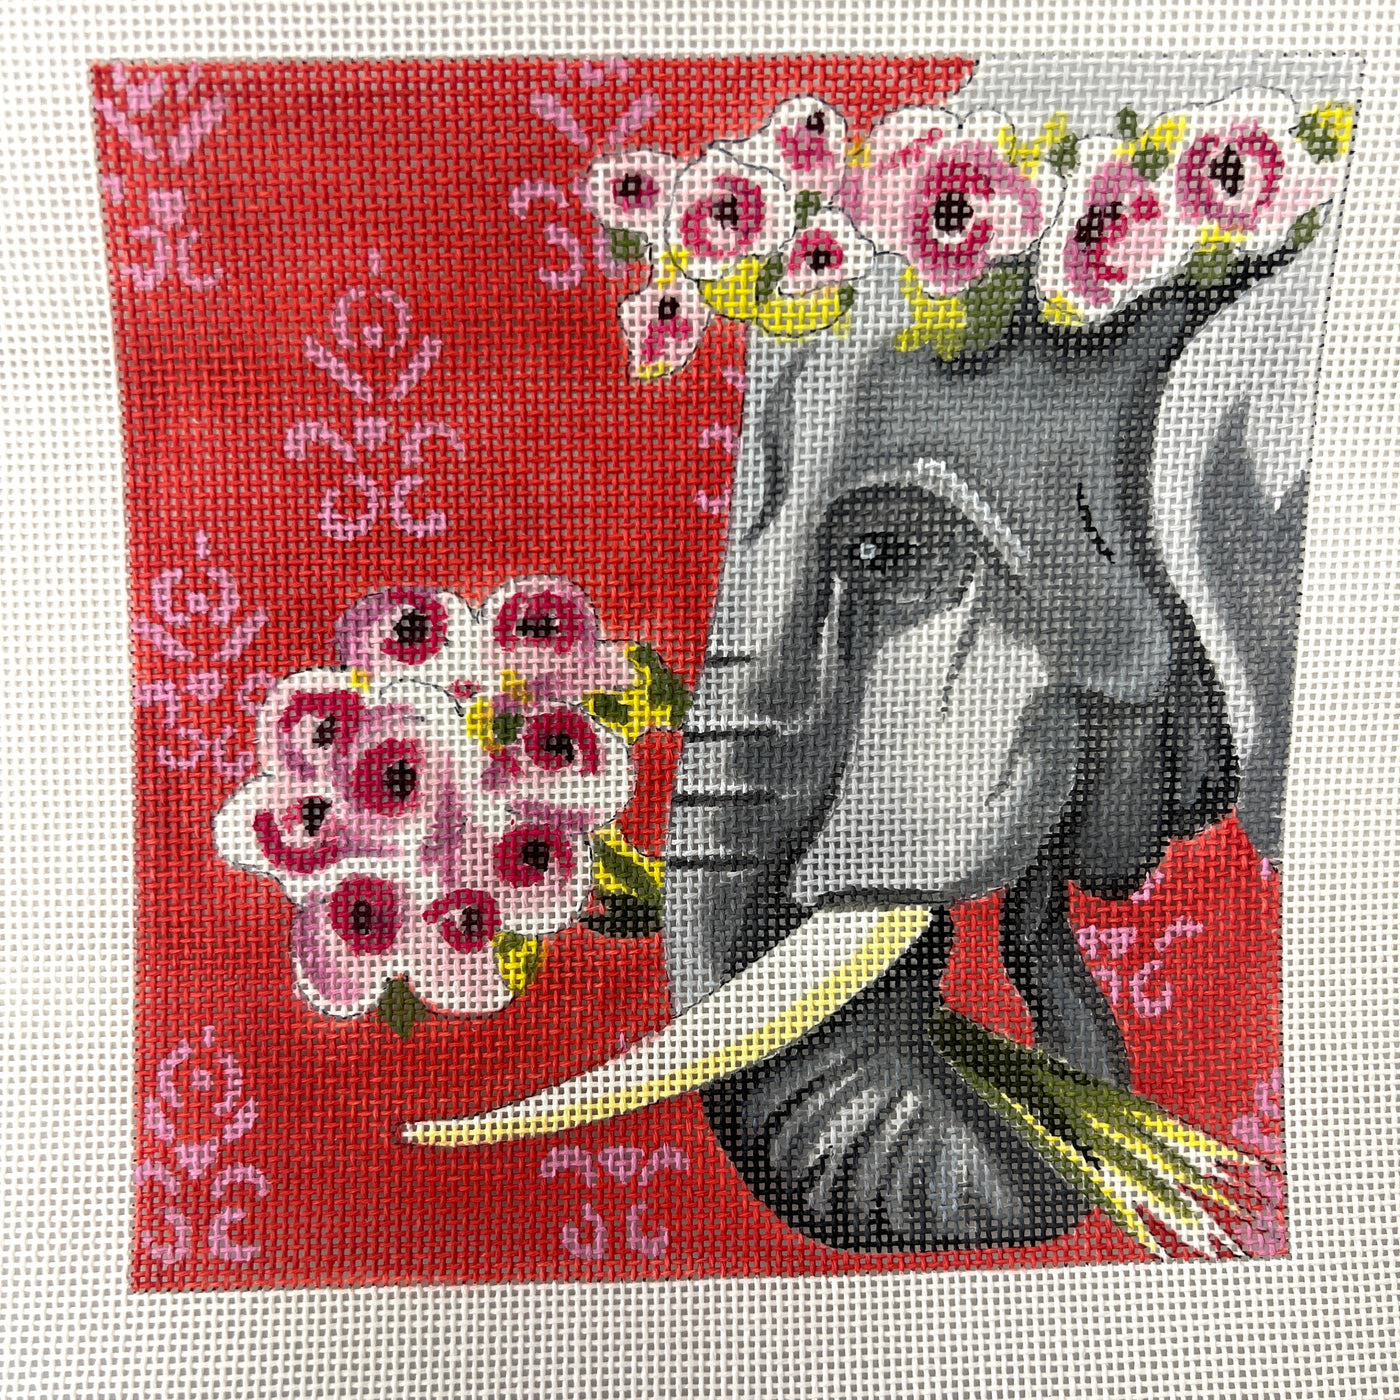 Elephant with Roses Insert